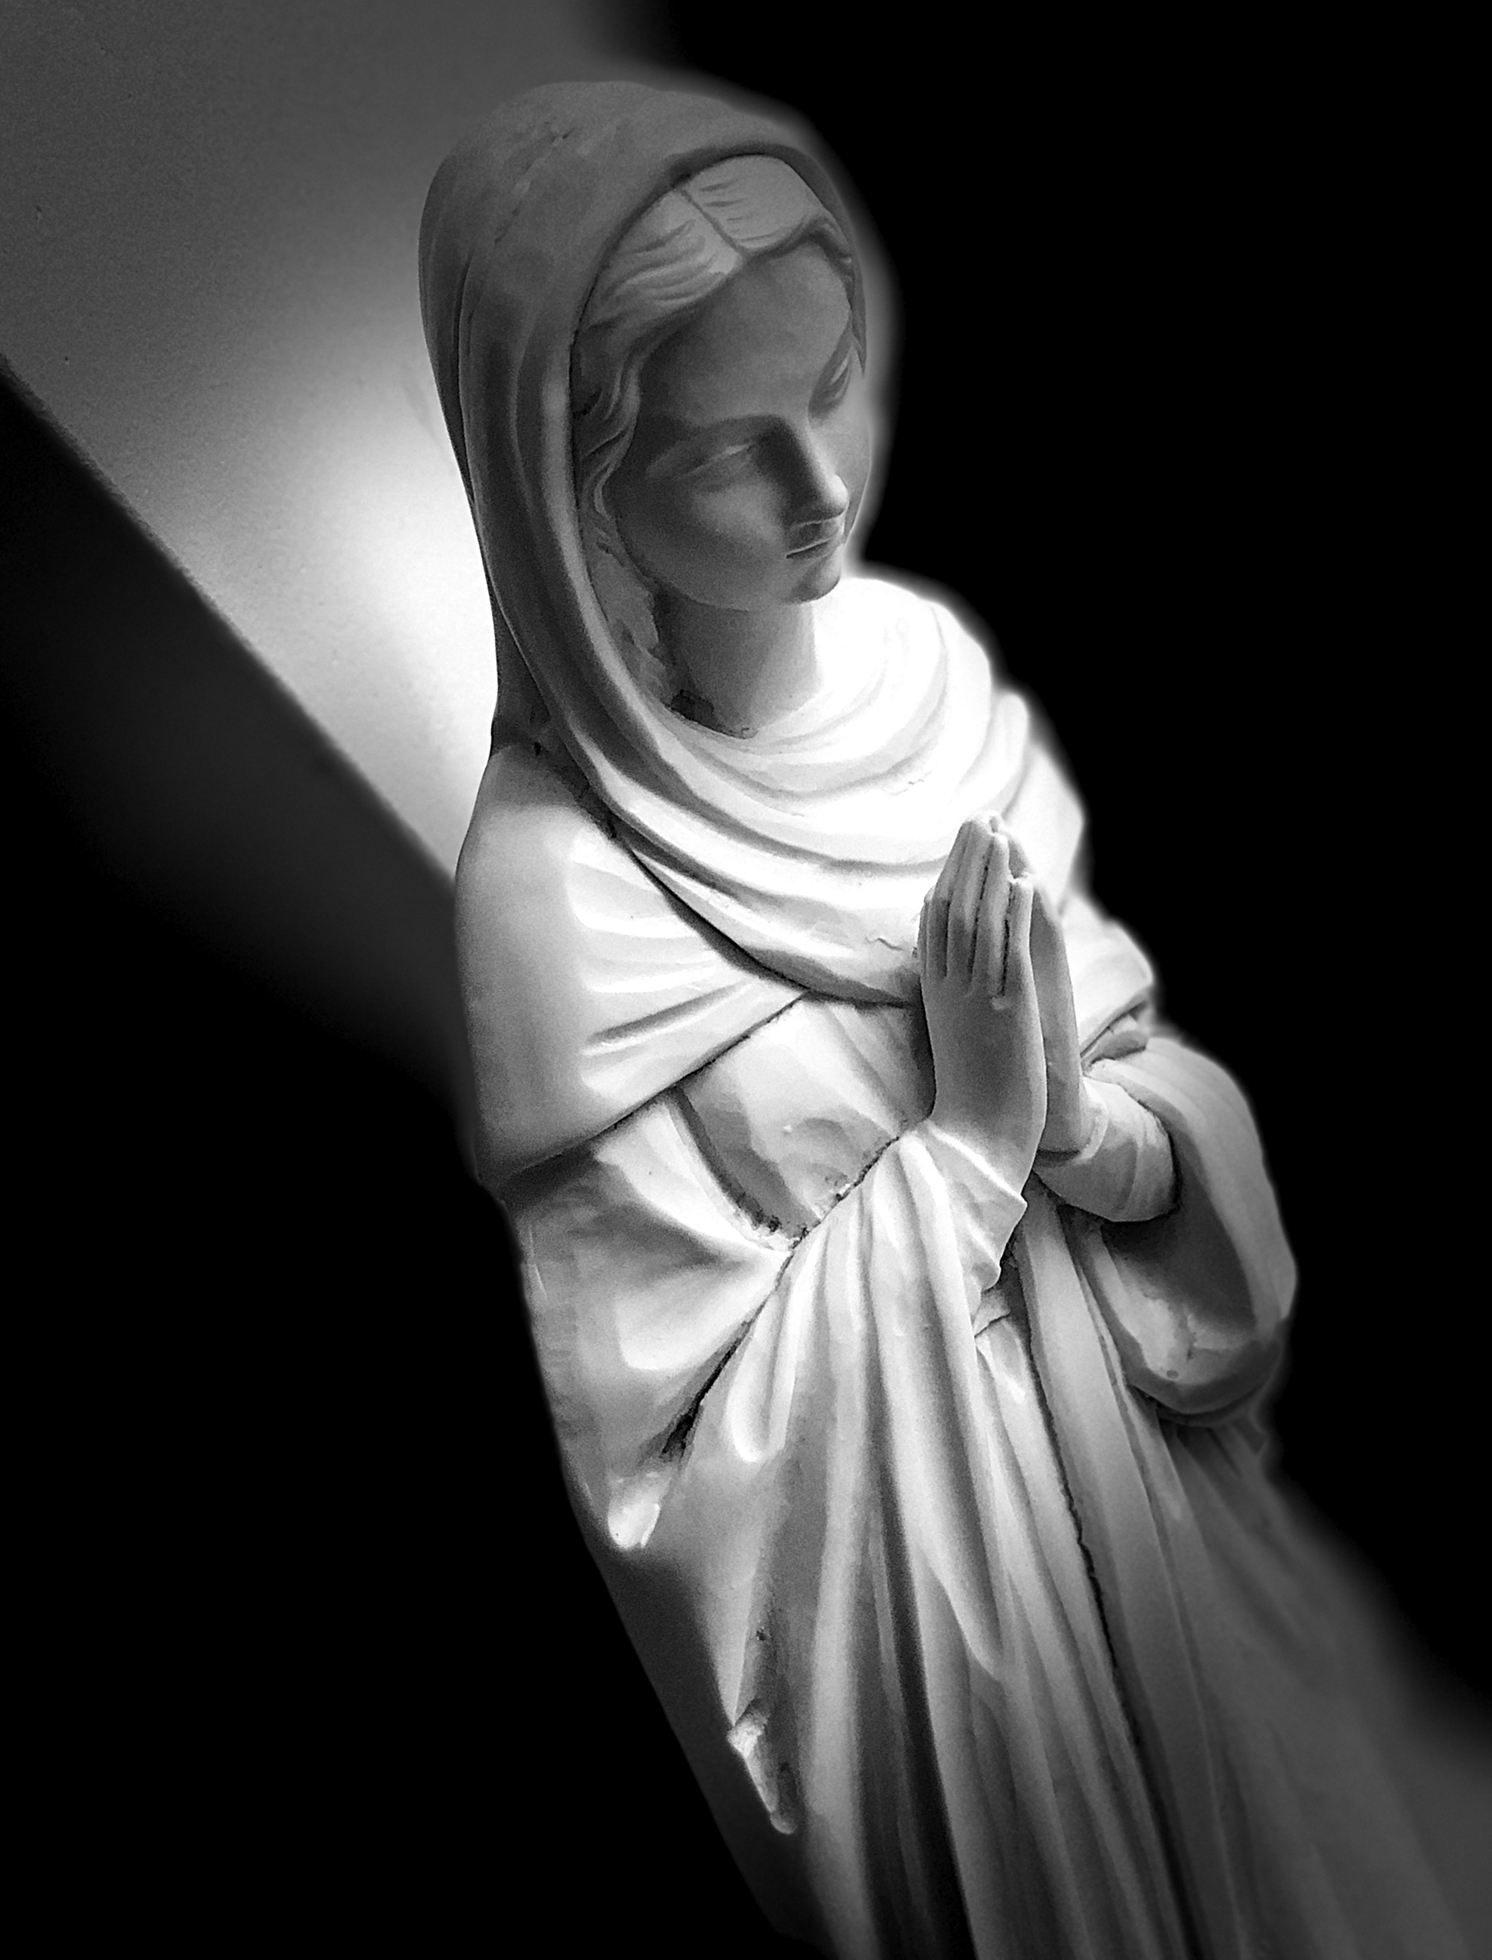 A statue of a woman in a loose gown with a headscarf whose hands are pressed together in prayer.